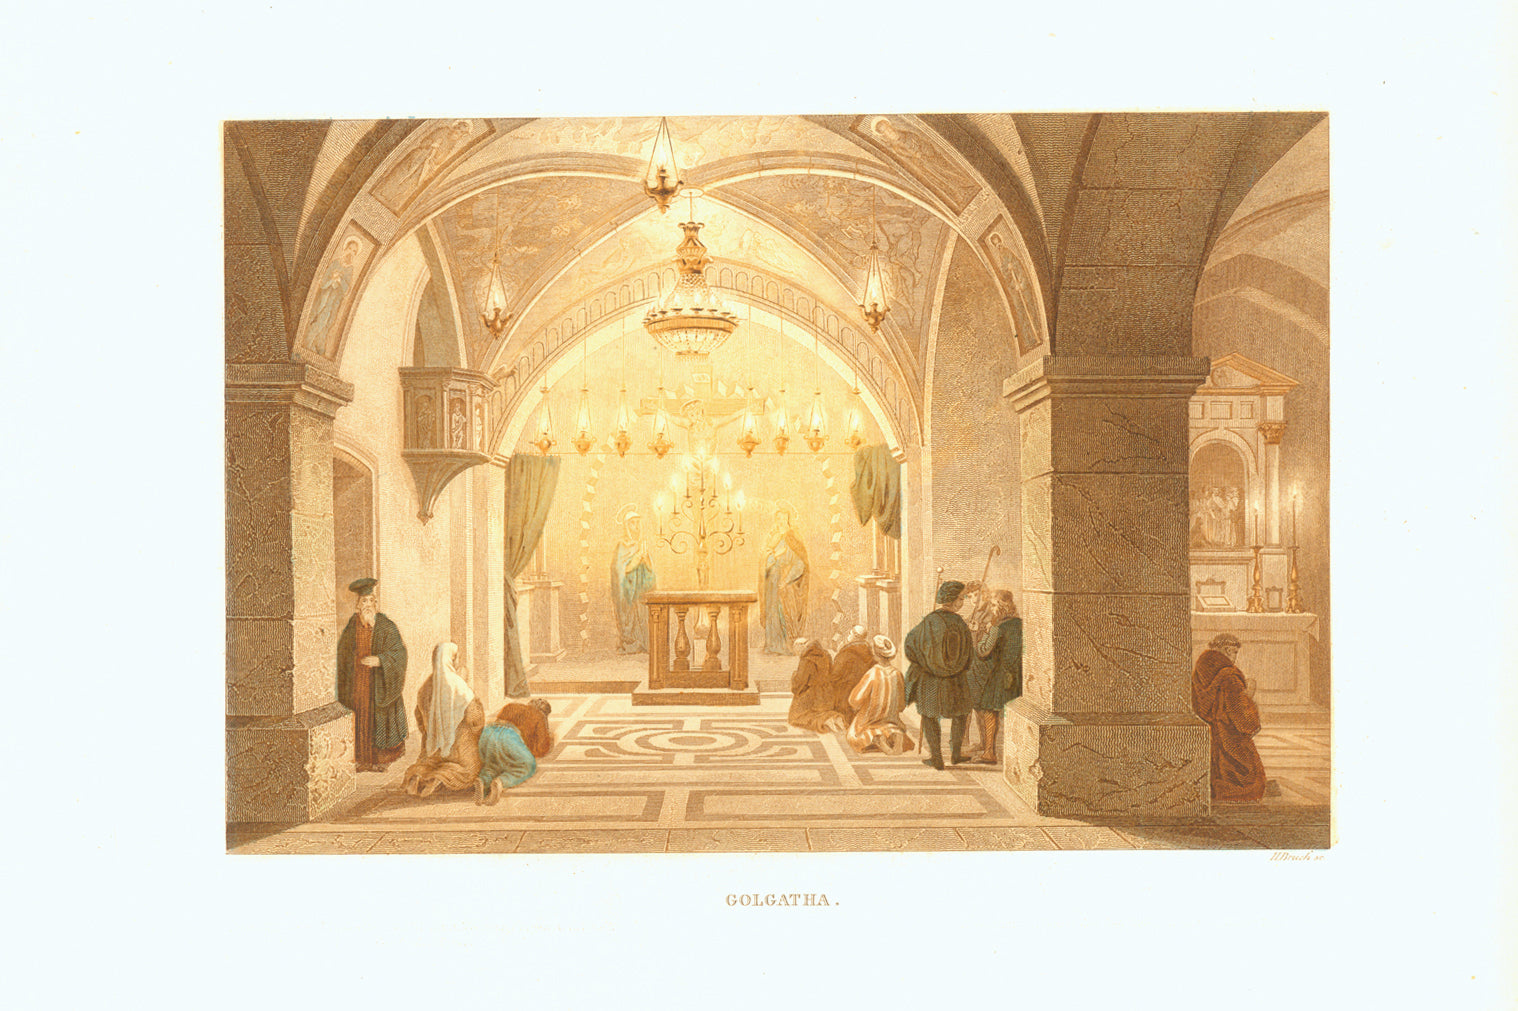 "Golgatha" - Holy Sepulcher  Original antique print   Toned steel engraving with hand-colored highlights by H. Bruck. Published 1861.